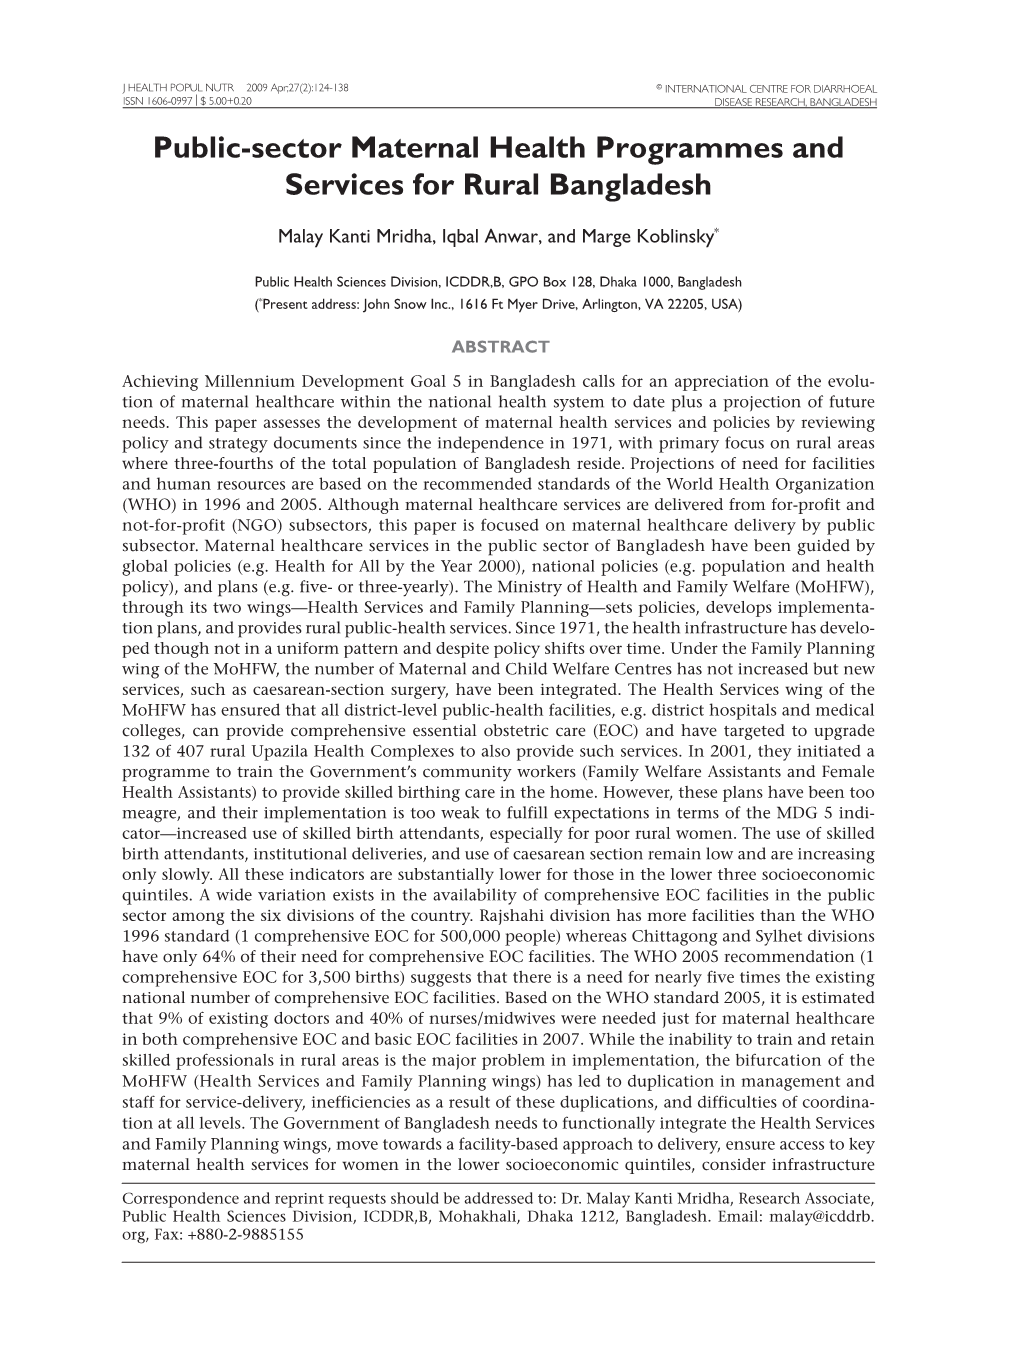 Public-Sector Maternal Health Programmes and Services for Rural Bangladesh